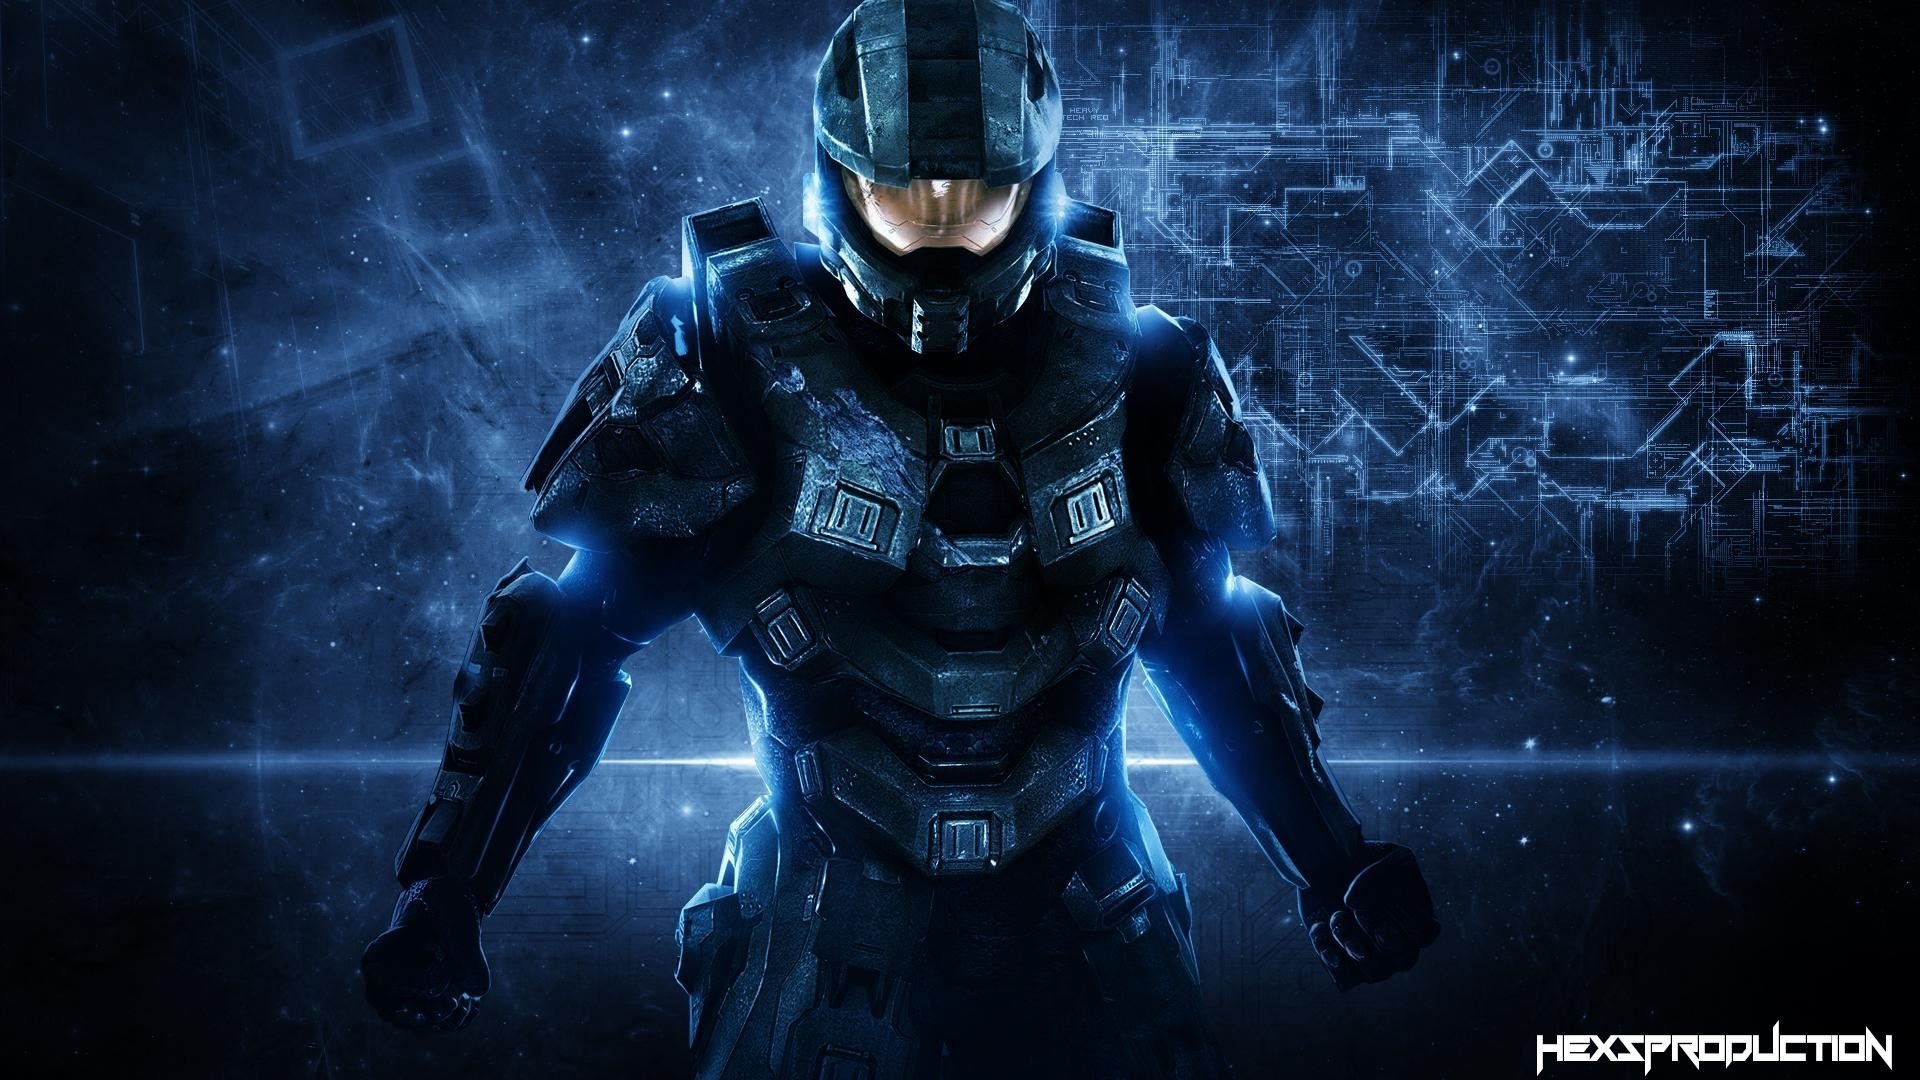 halo, 5, Guardians, Shooter, Fps, Action, Fighting, Warrior, Sci fi, Futuristic, 1haloguardians, Poster Wallpaper